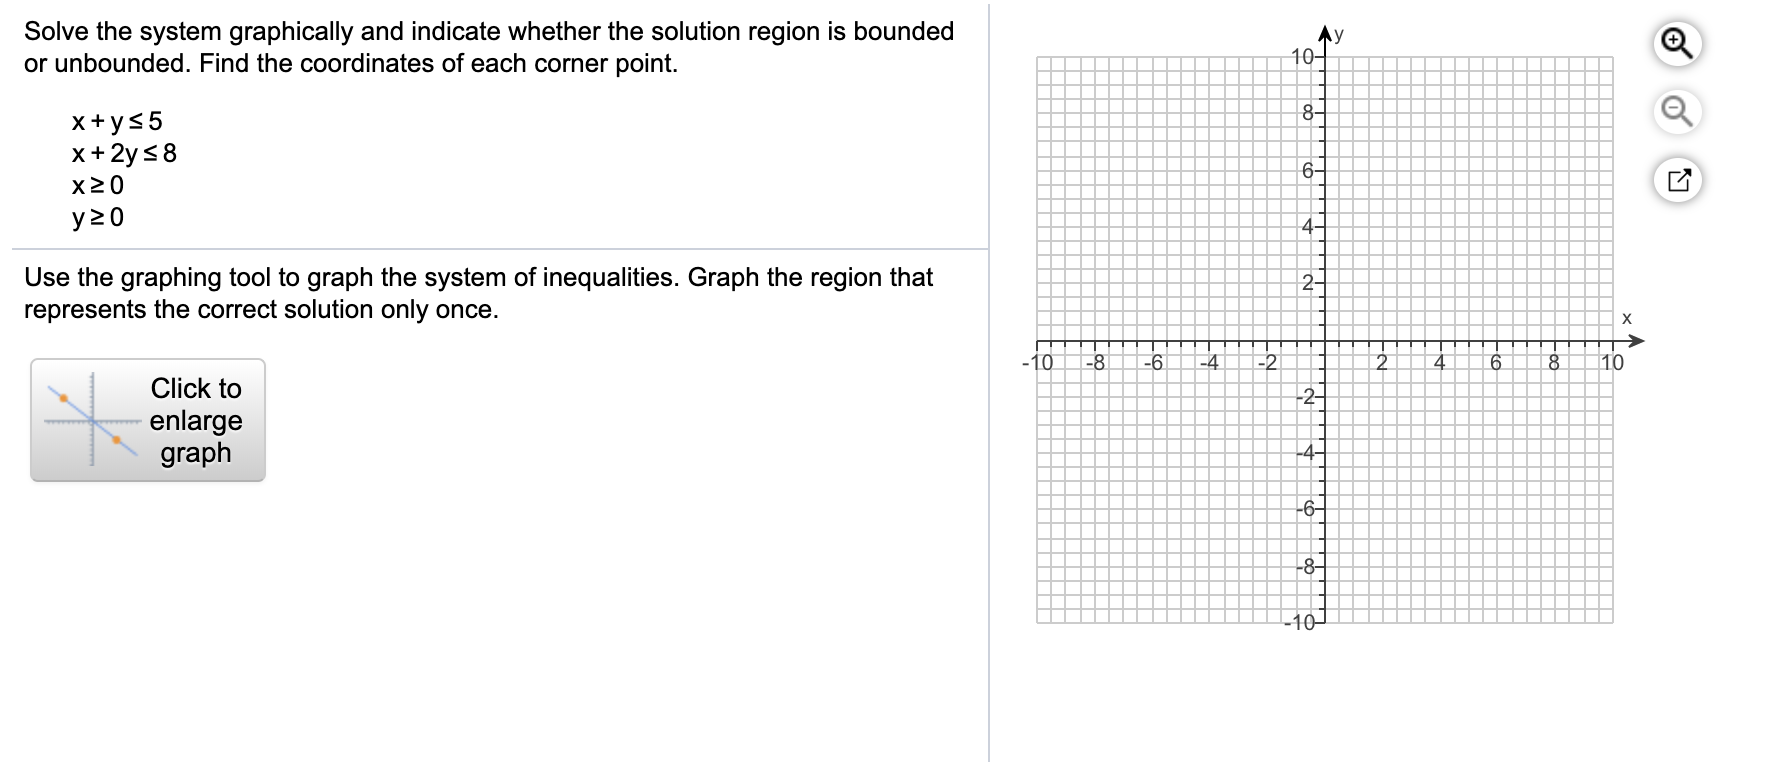 Solve the system graphically and indicate whether the solution region is bounded
or unbounded. Find the coordinates of each corner point.
y
10-
8
xys5
x+2y s8
6-
x20
y z 0
4-
Use the graphing tool to graph the system of inequalities. Graph the region that
represents the correct solution only once.
2
X
10
-8
-6
-4
-2
2
4
6
10
Click to
2
enlarge
graph
4-
6
-8
-10-
